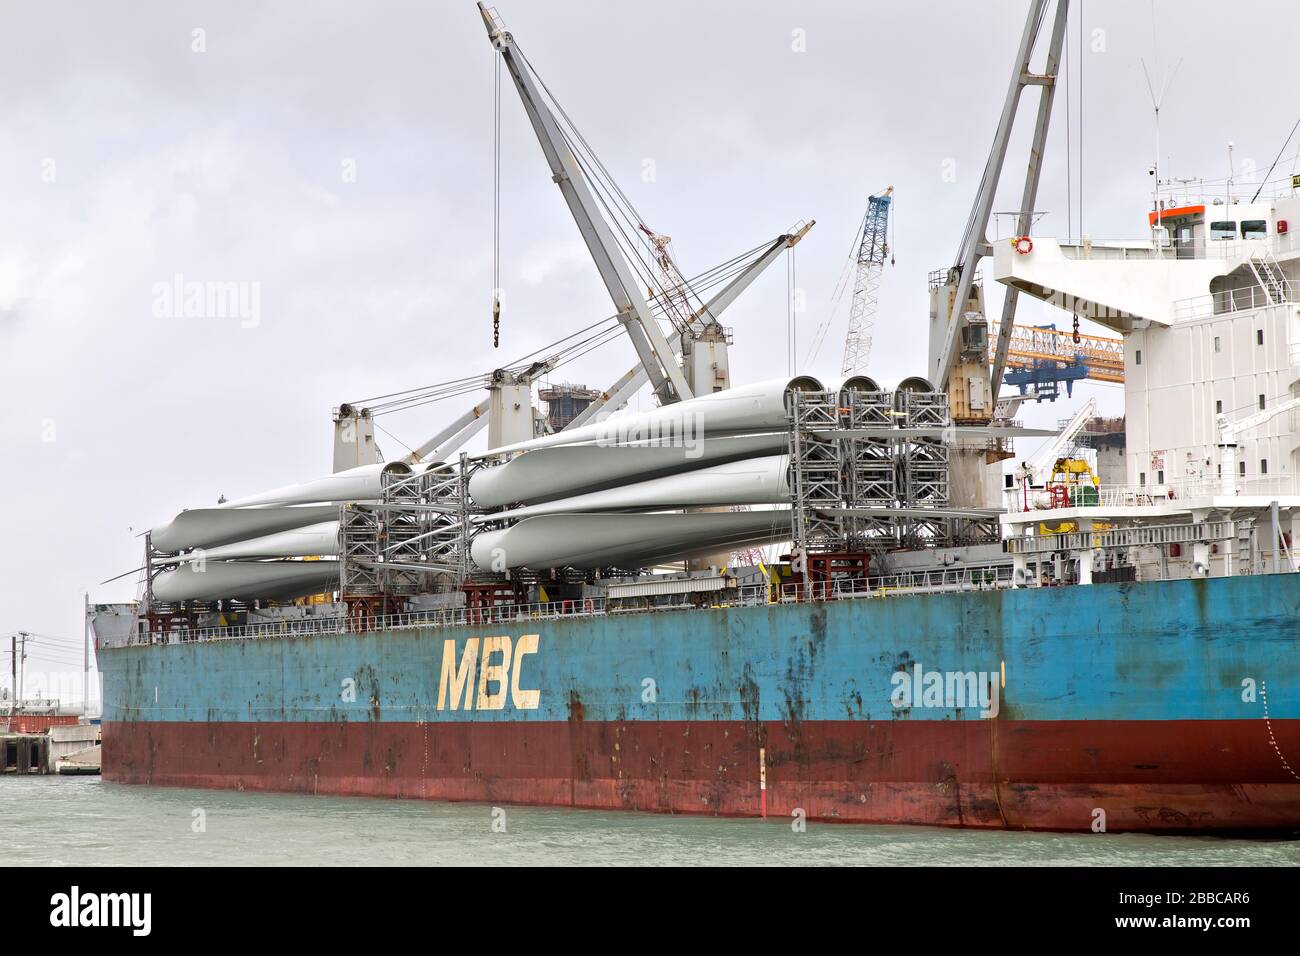 Giant Wind Turbine Propeller Blades preparing to offload  from freighter,   Port Aransas, Texas, Stock Photo